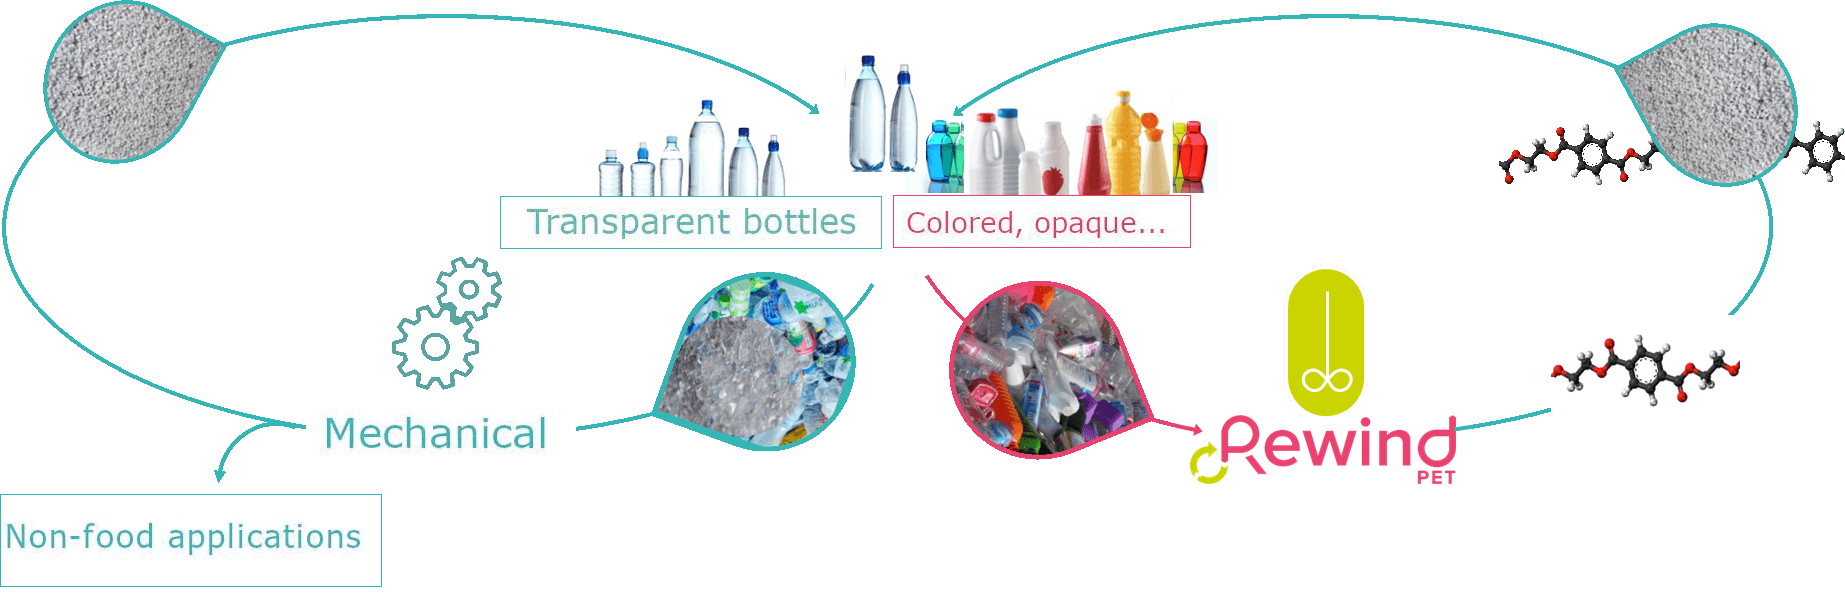 Complementary closed-loop chemical recycling of colored and opaque PET plastic 